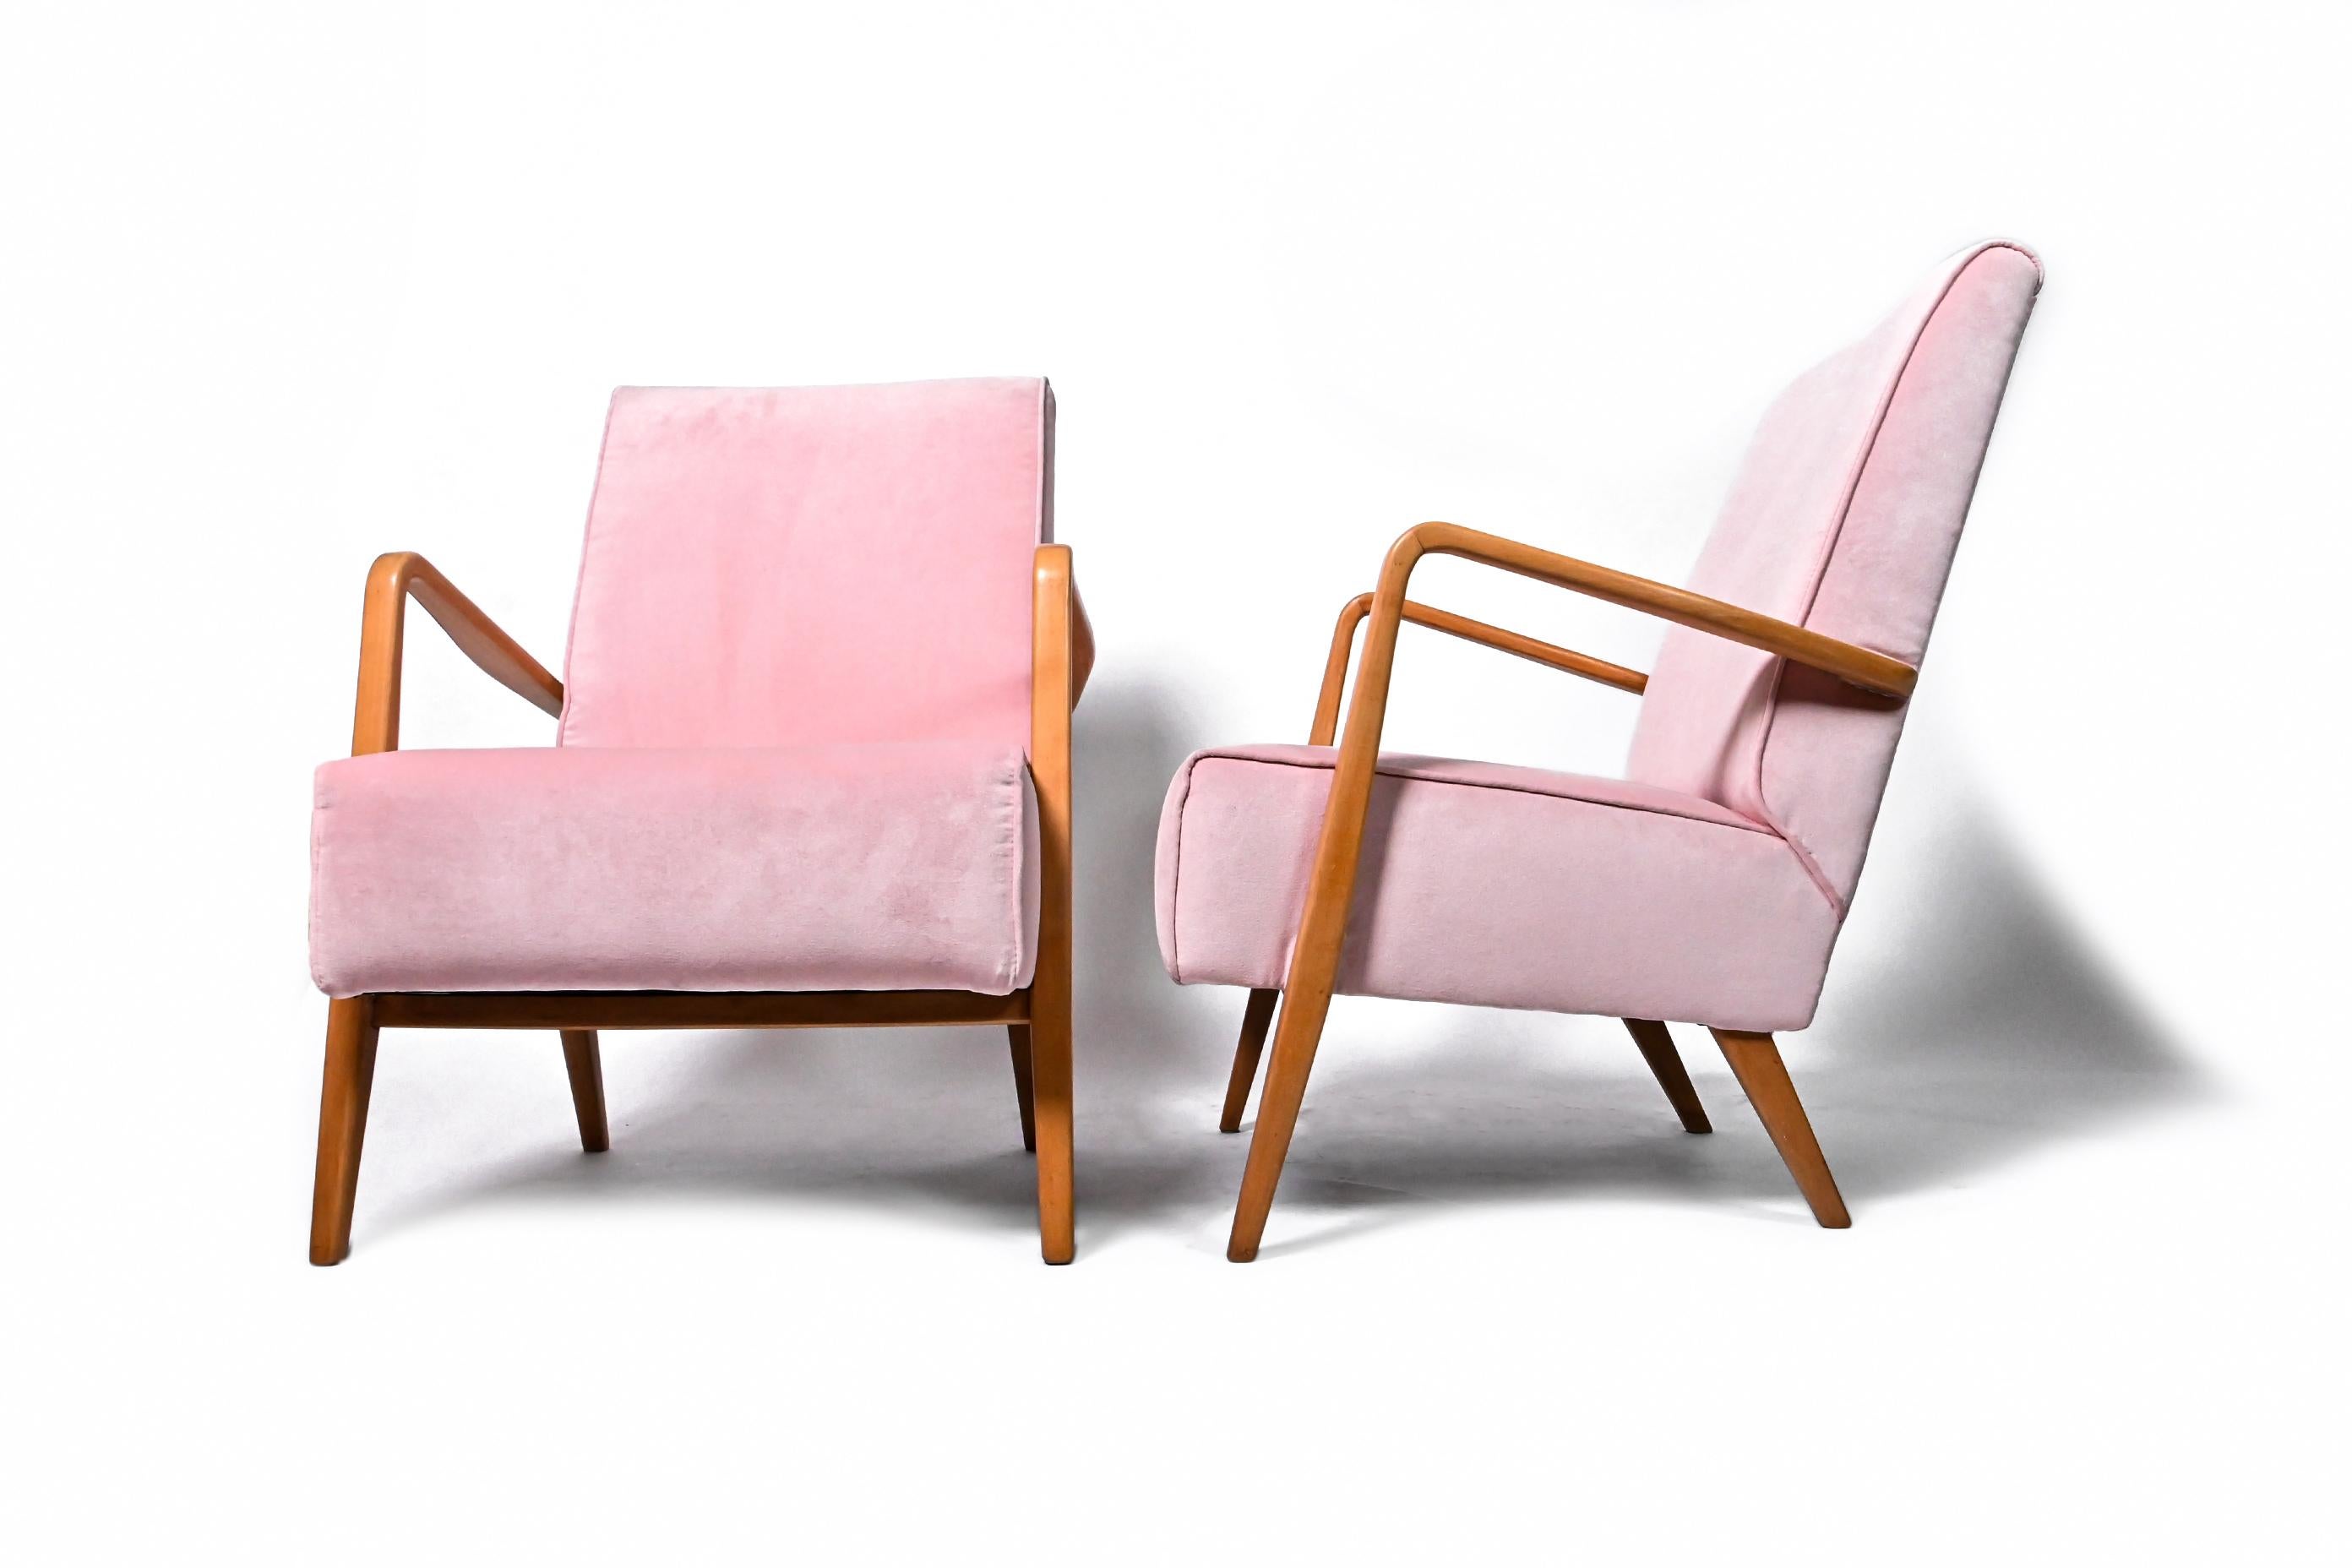 Pair of mid-century armchairs, 1960s.
Pink velvet upholstery fabric.